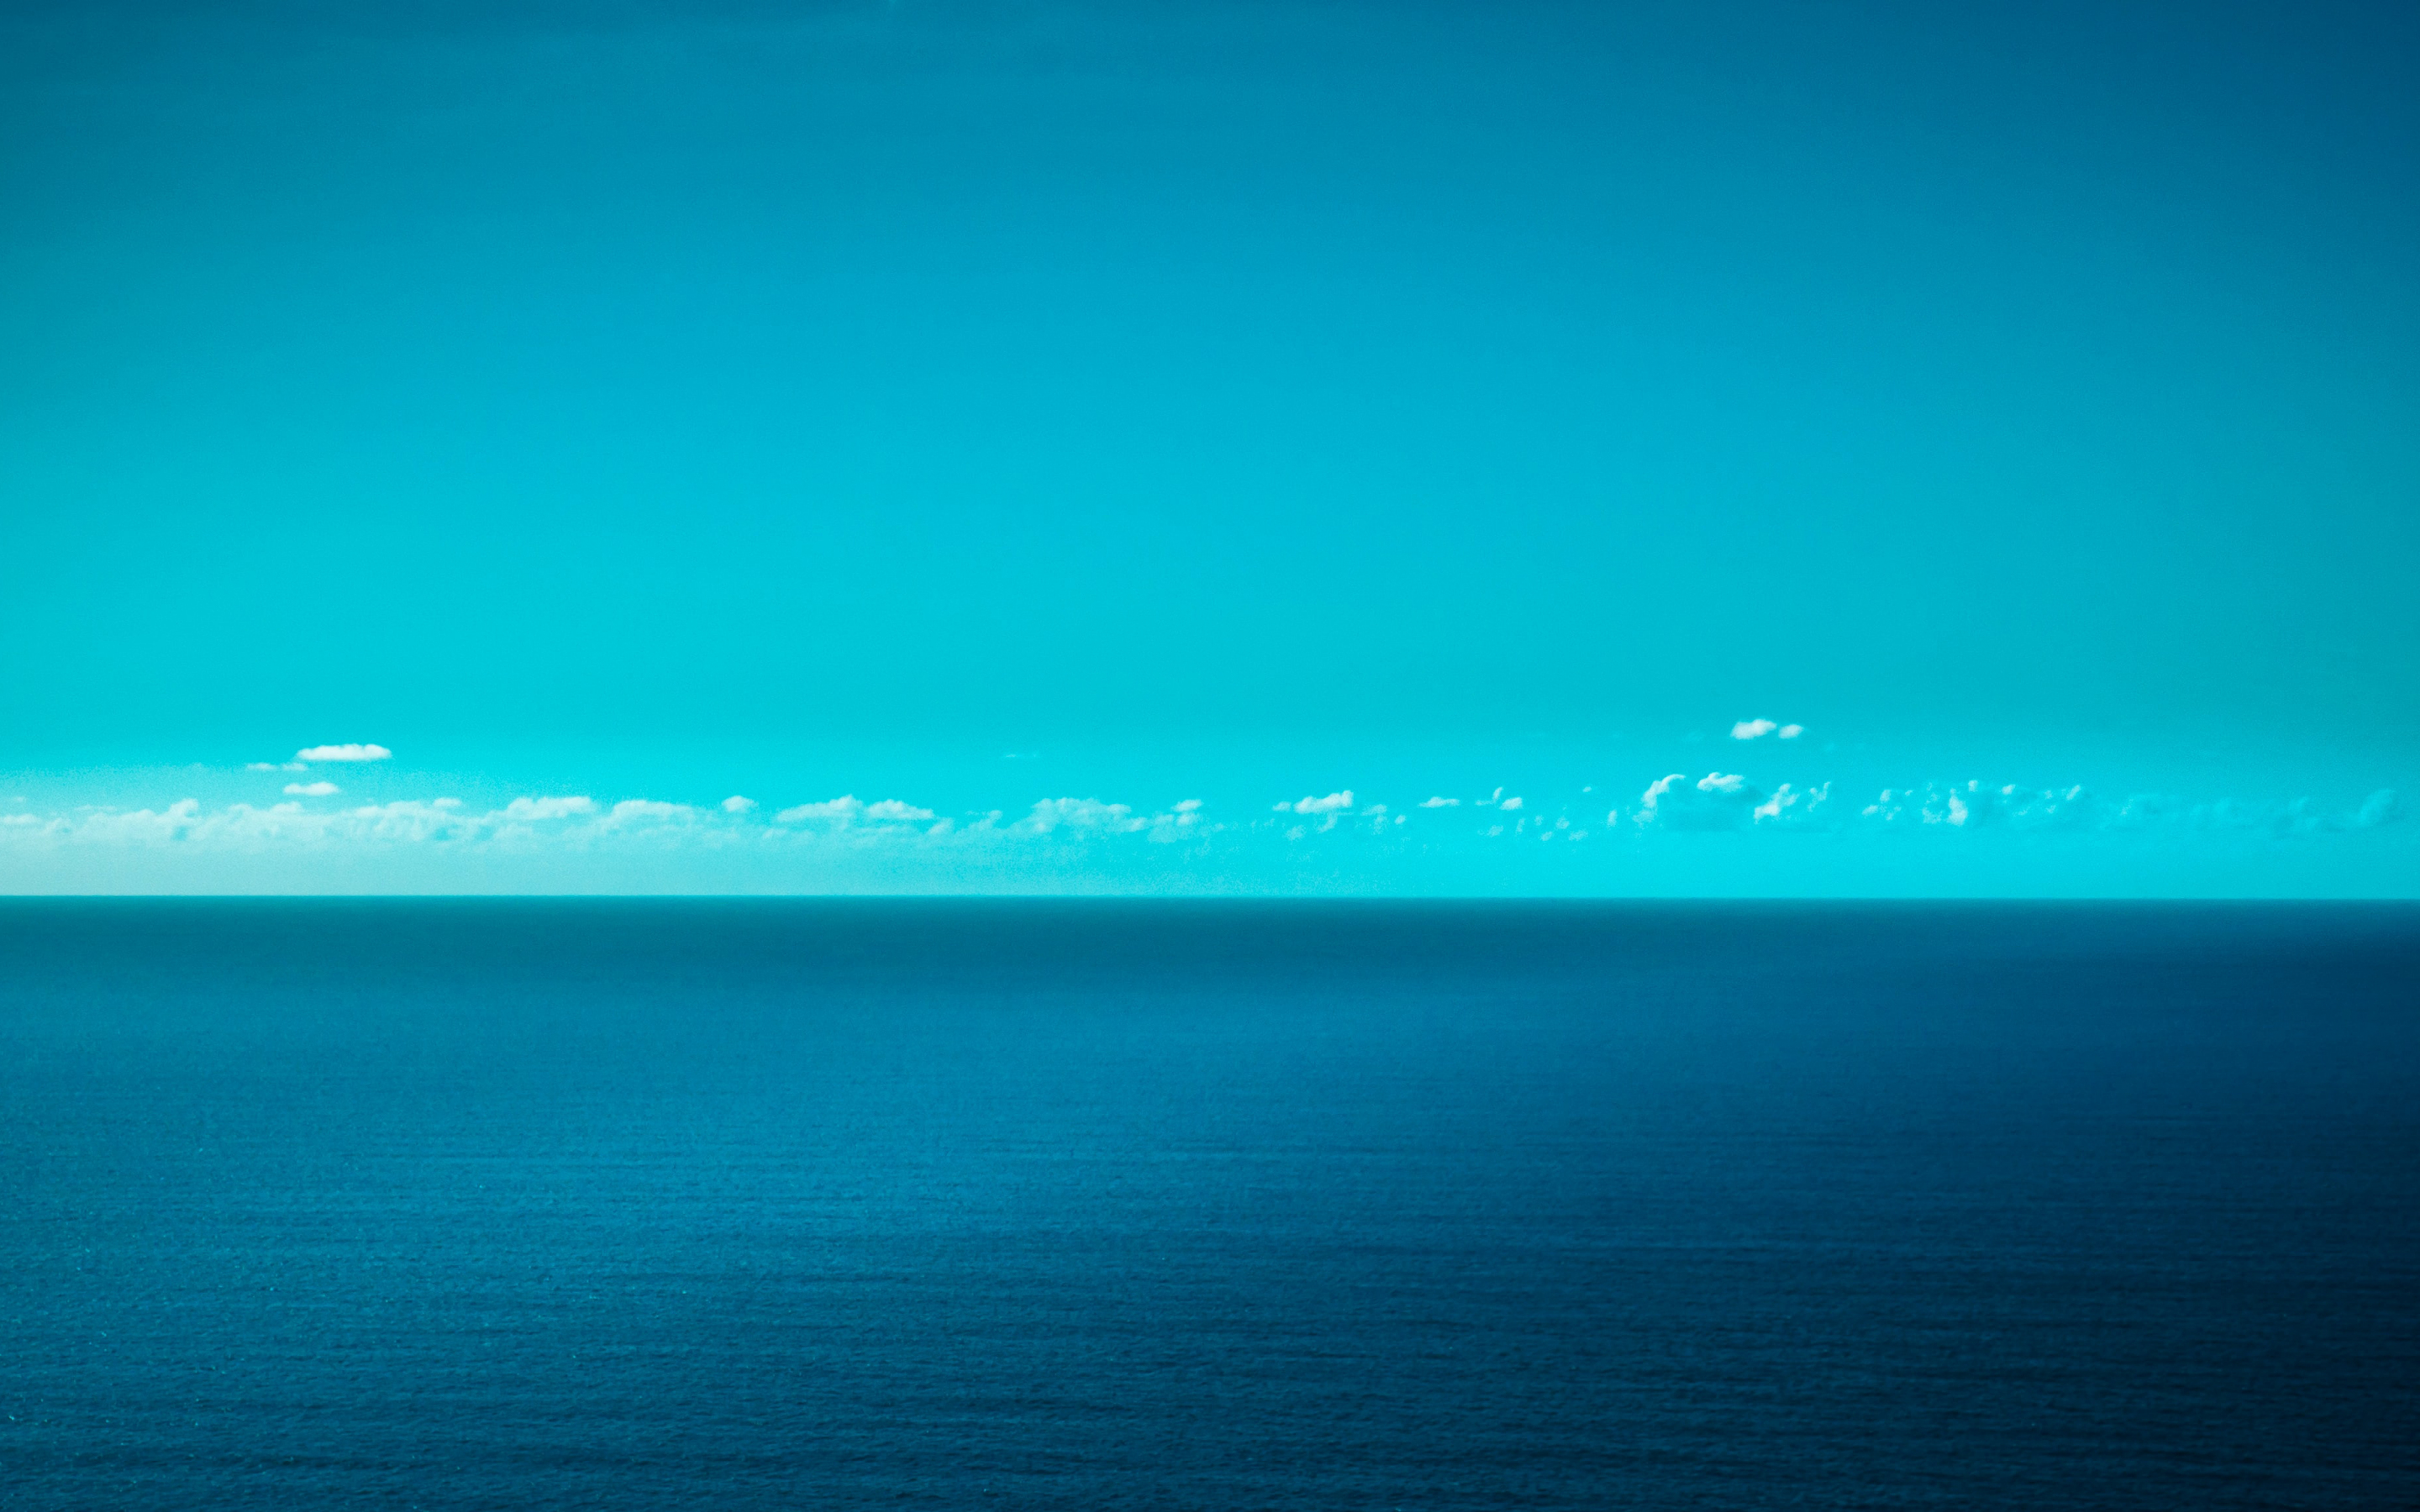 Water under blue sky, calm and clean, 2880x1800 wallpaper